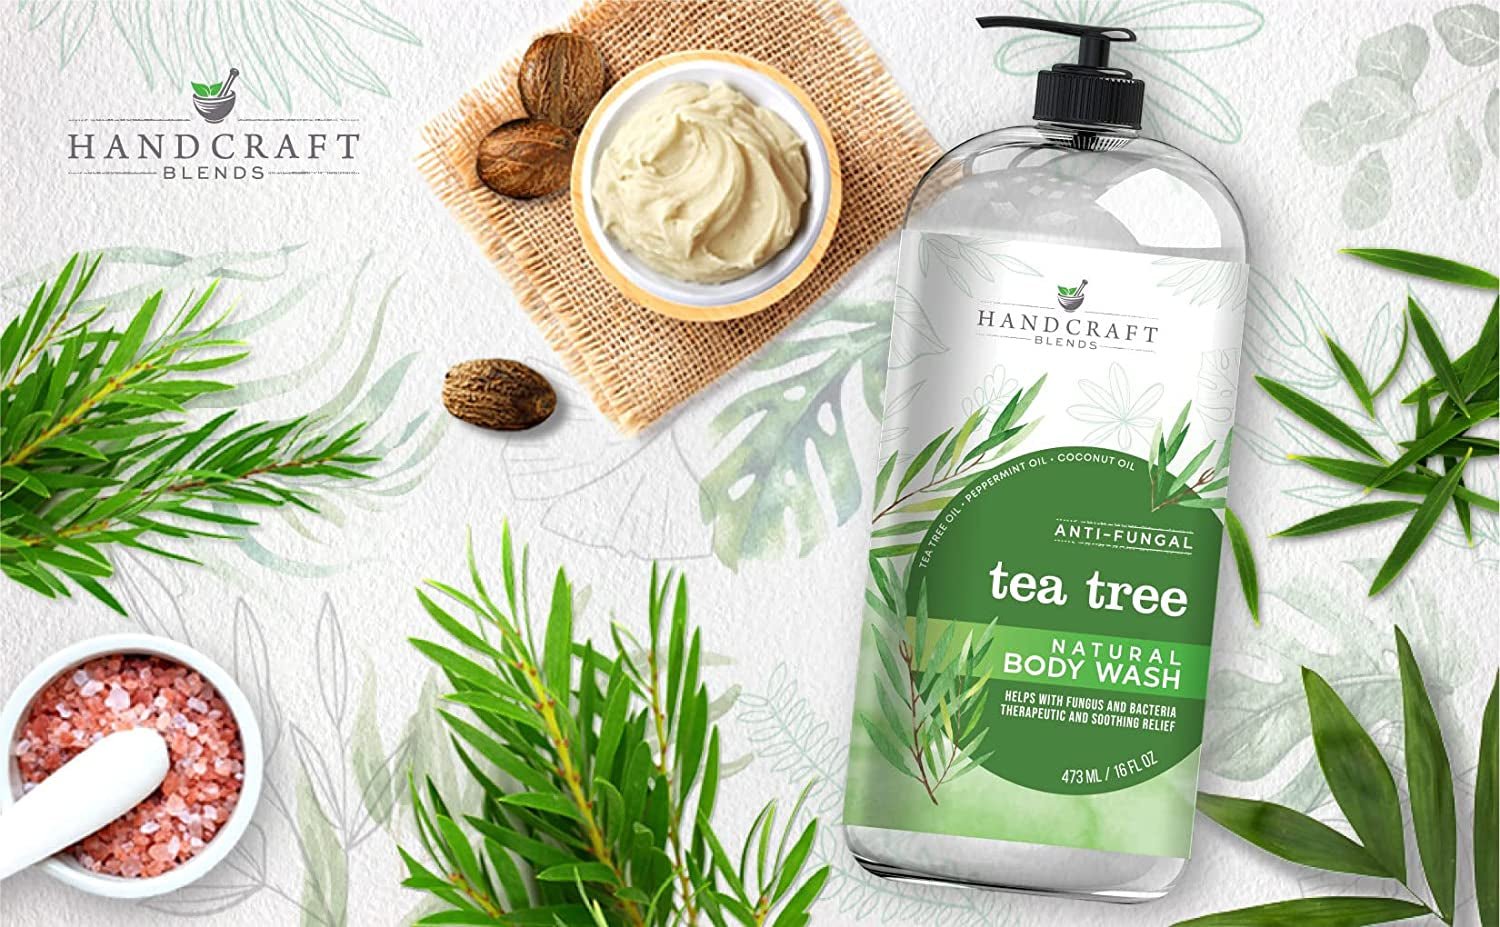 Handcraft Tea Tree Oil Body Wash 16 Oz - Extra Strength Body Wash for Athletes Foot, Nail Fungus, Itchy Skin, Jock Itch, Acne and Eczema - Tea Tree Body Wash for Men & Women